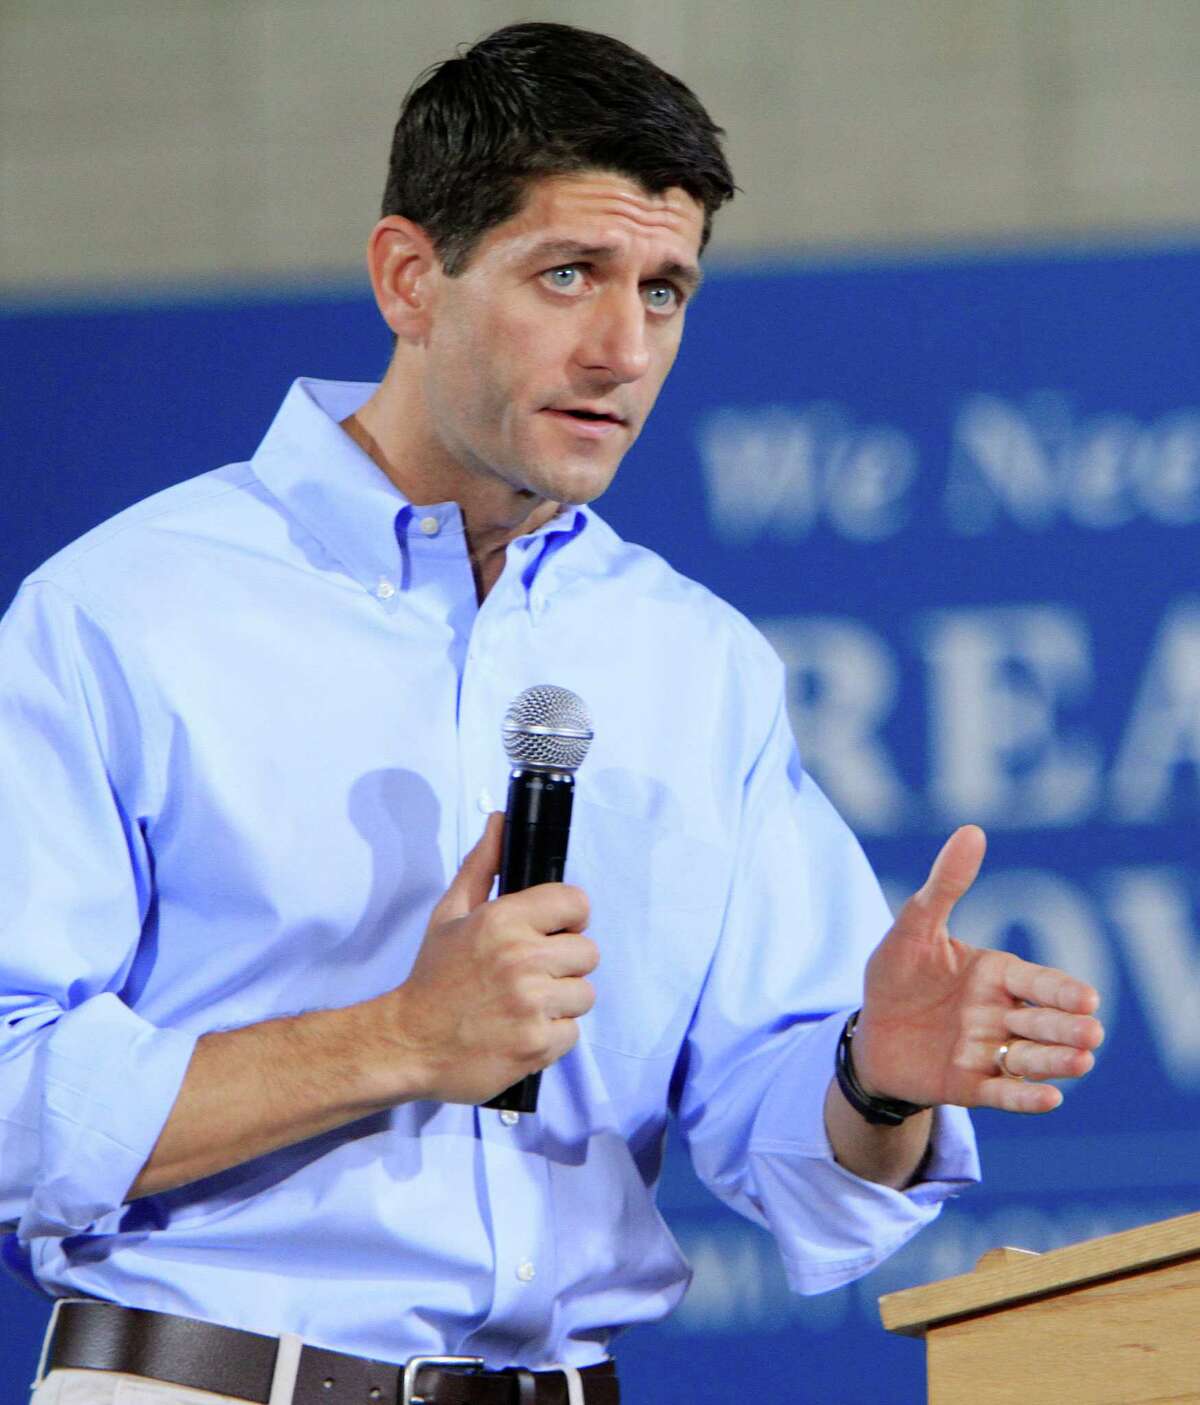 Republican Vice Presidential candidate Paul Ryan speaks during a campaign event, Saturday, Sept. 29, 2012 in Derry, N.H. (AP Photo/Jim Cole)